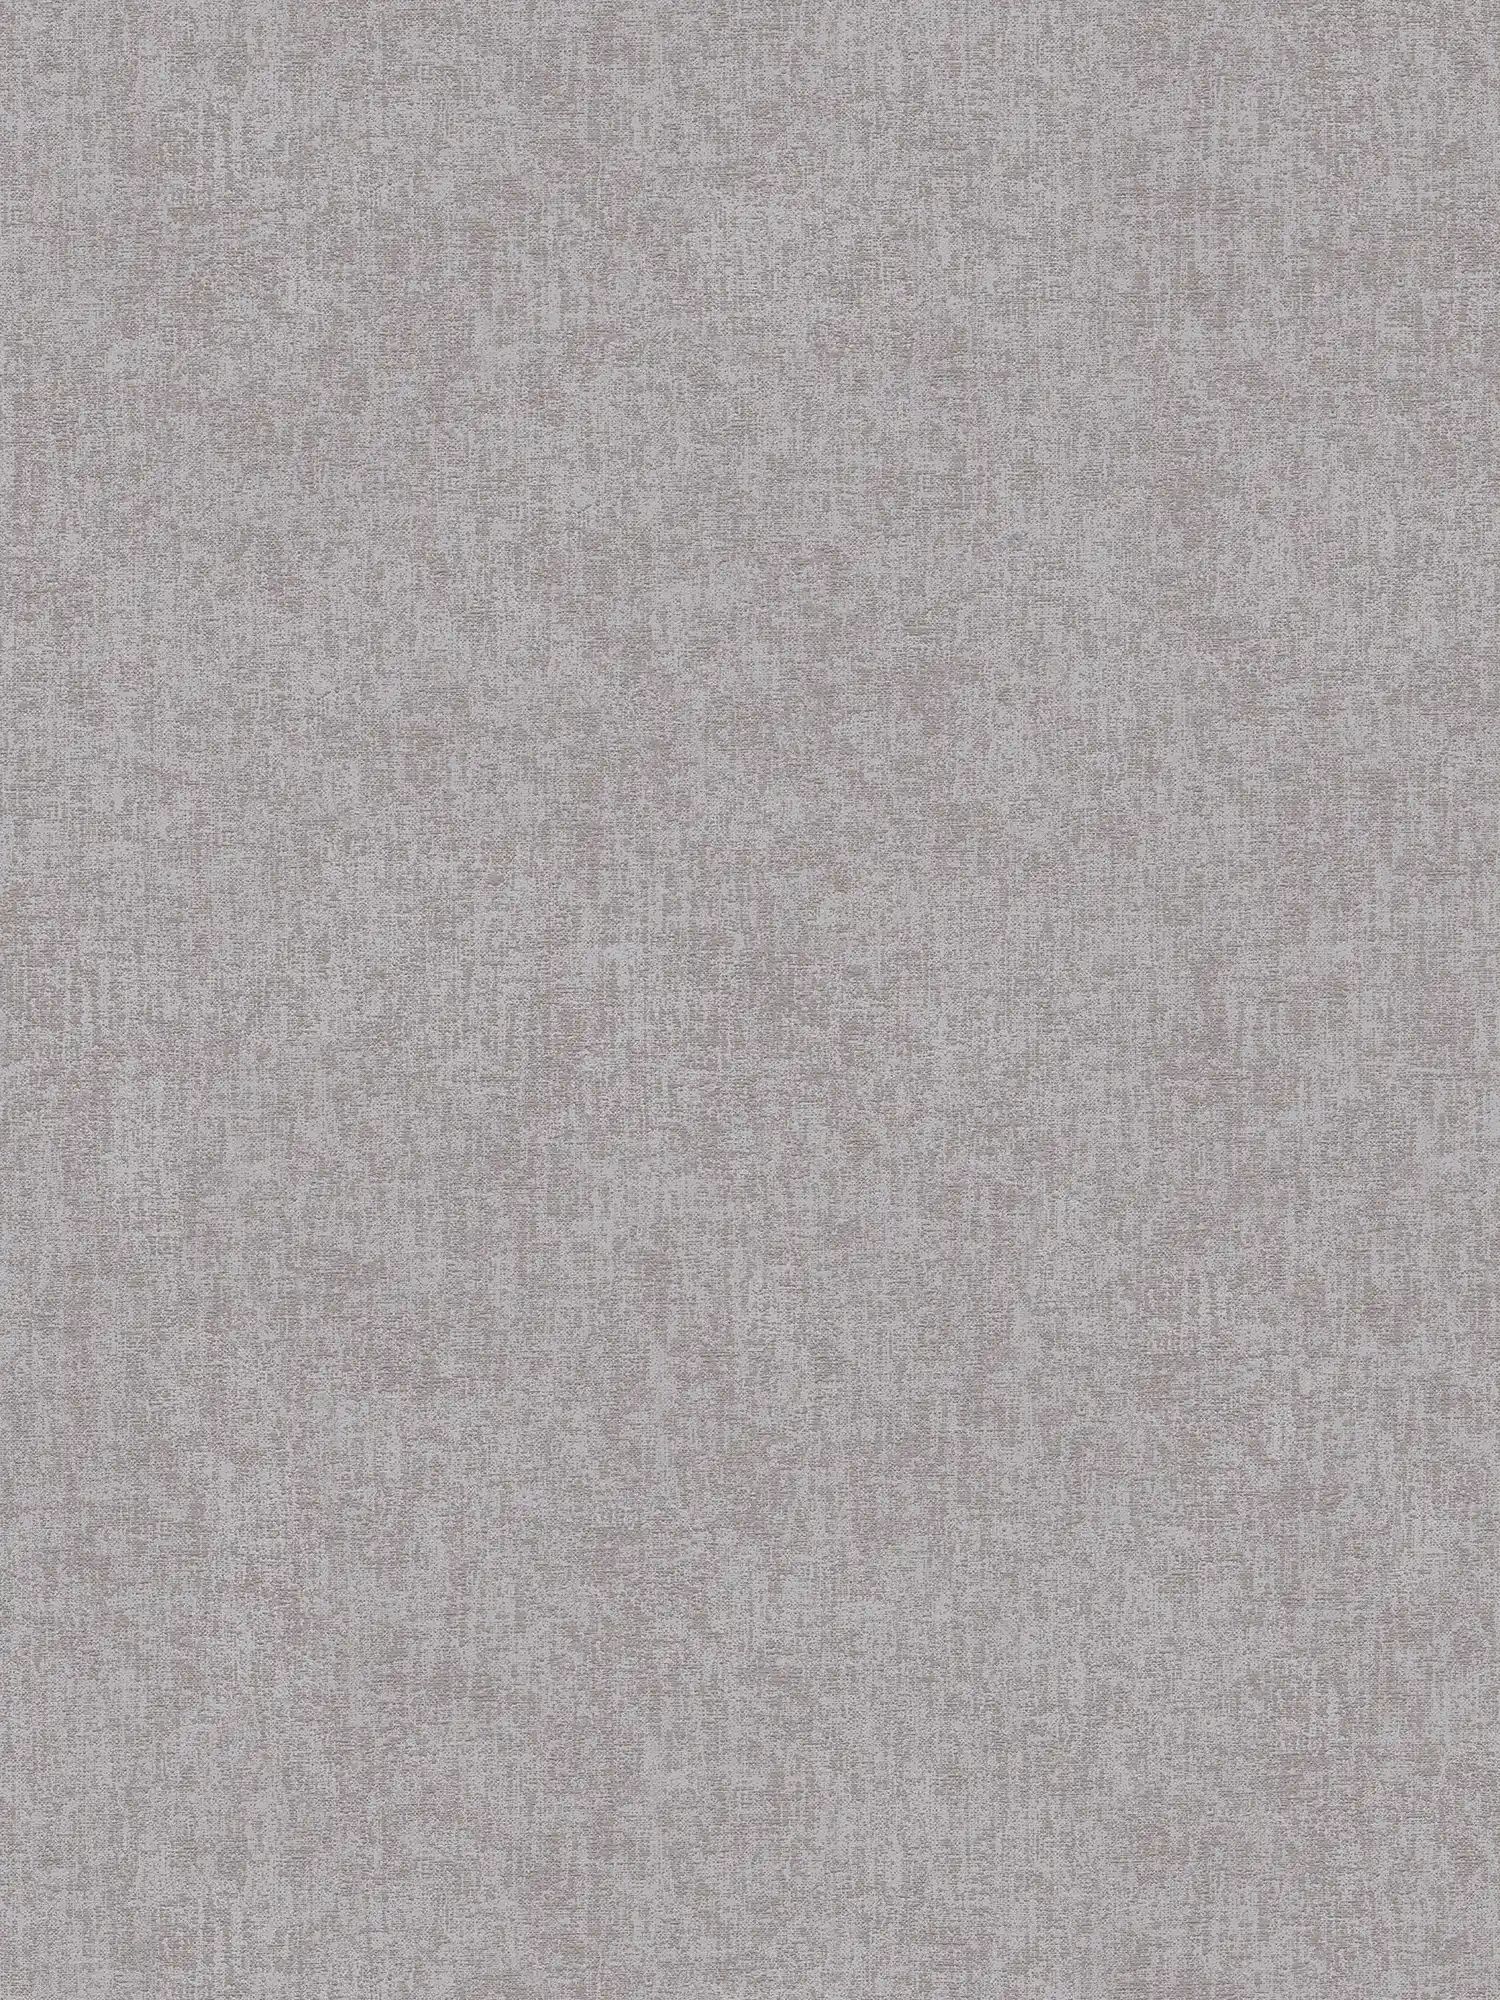 Plain wallpaper mottled with textile look - grey, brown
